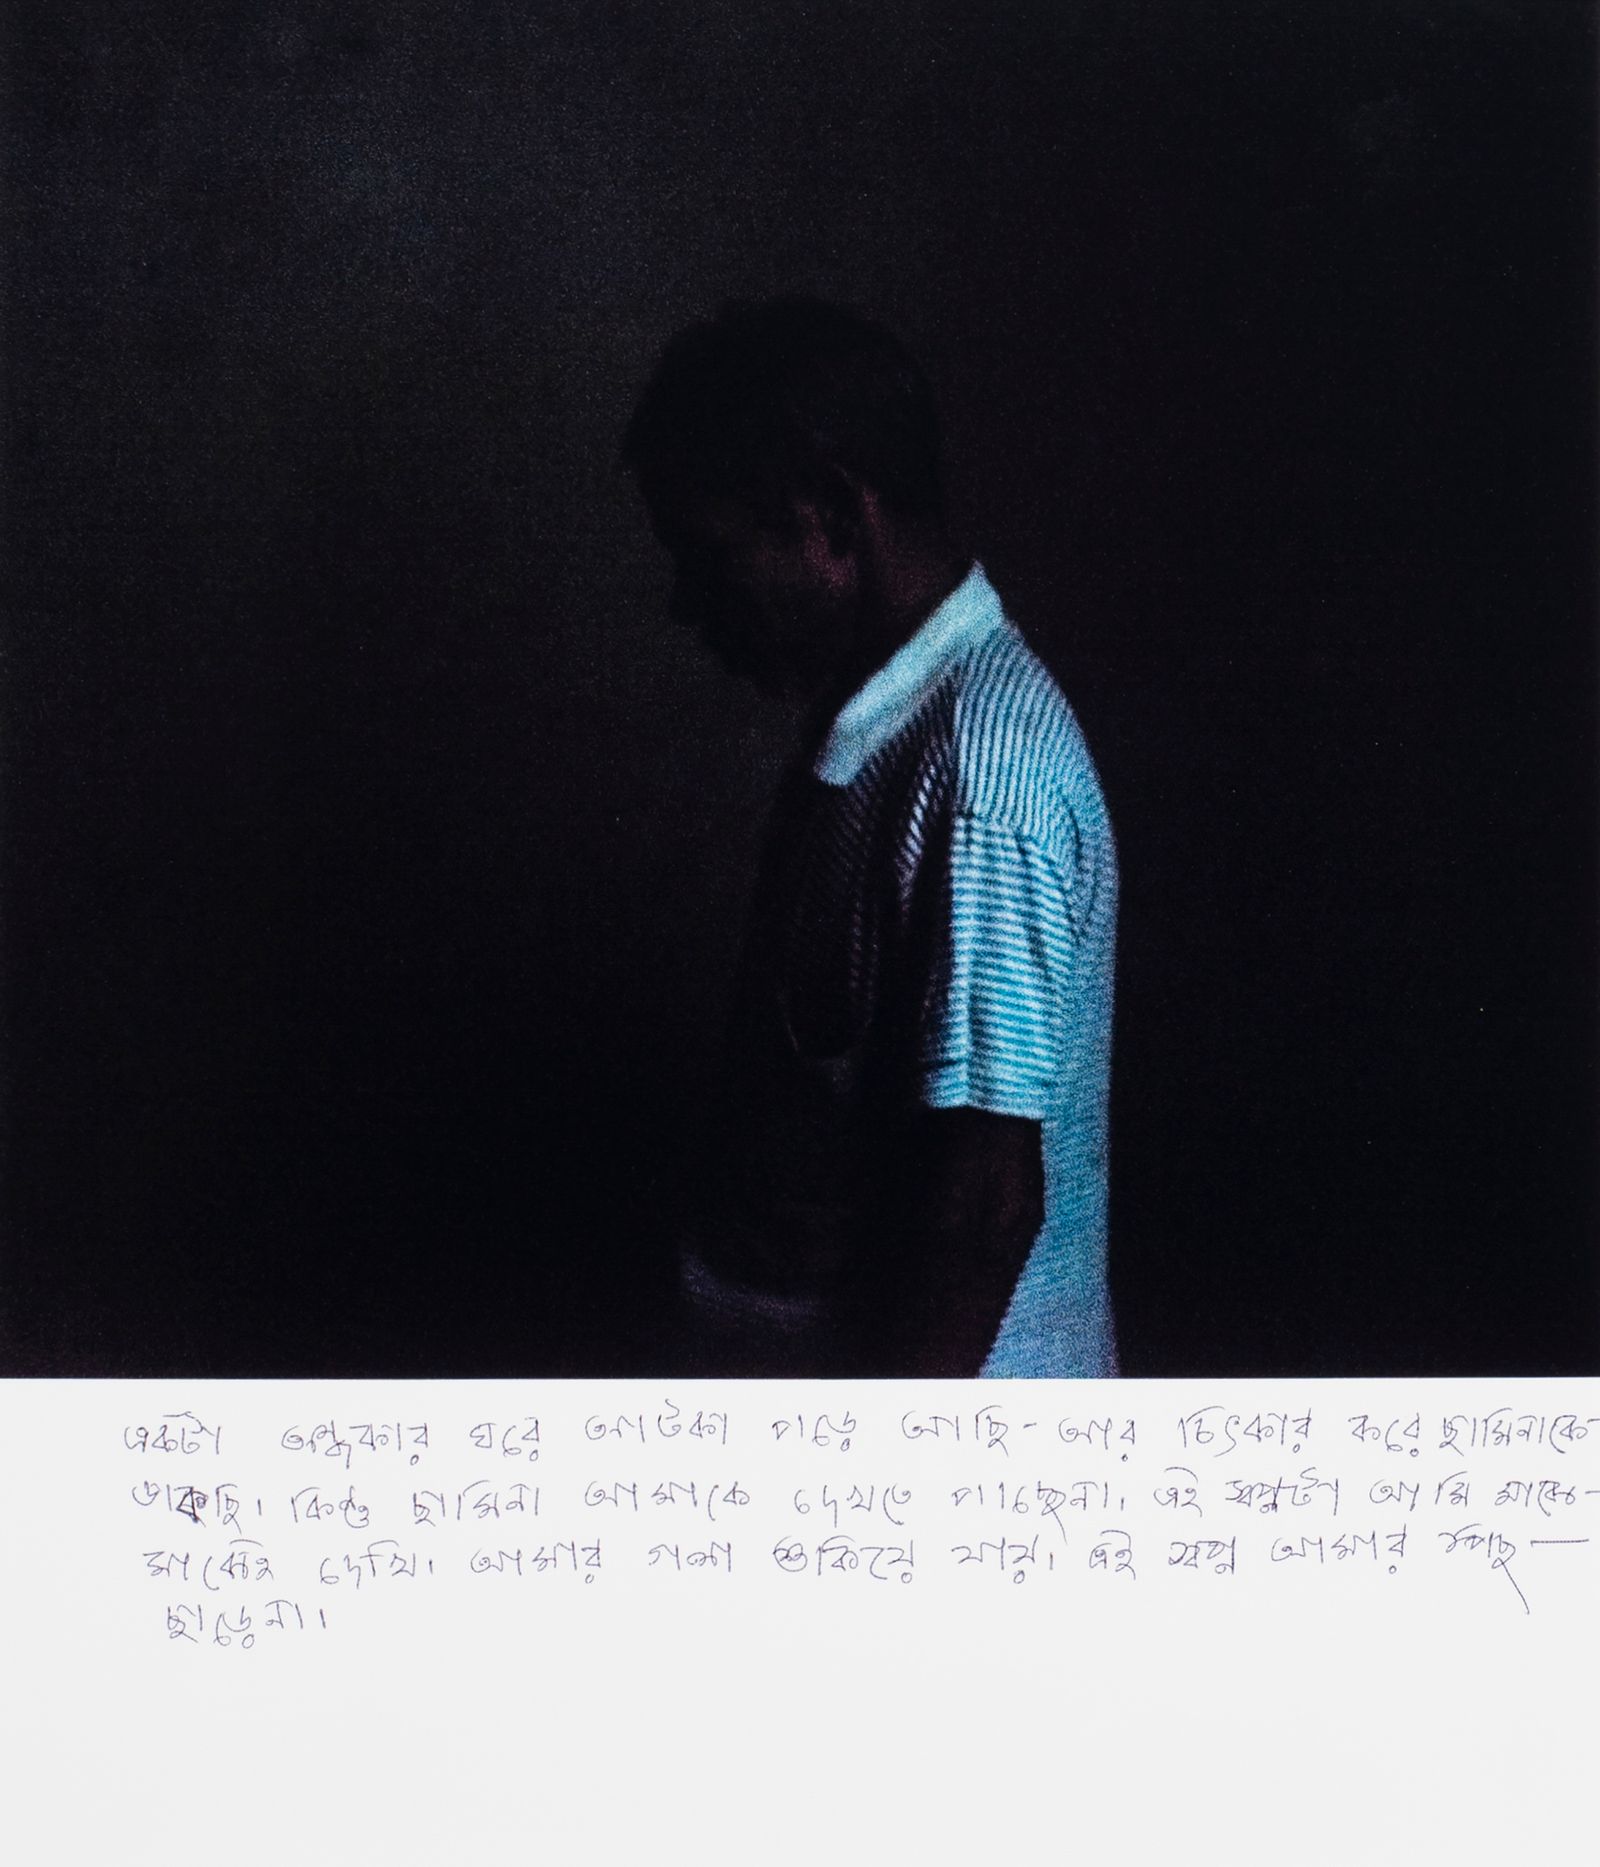 © Ashfika Rahman - Image from the Files of the Disappeared photography project